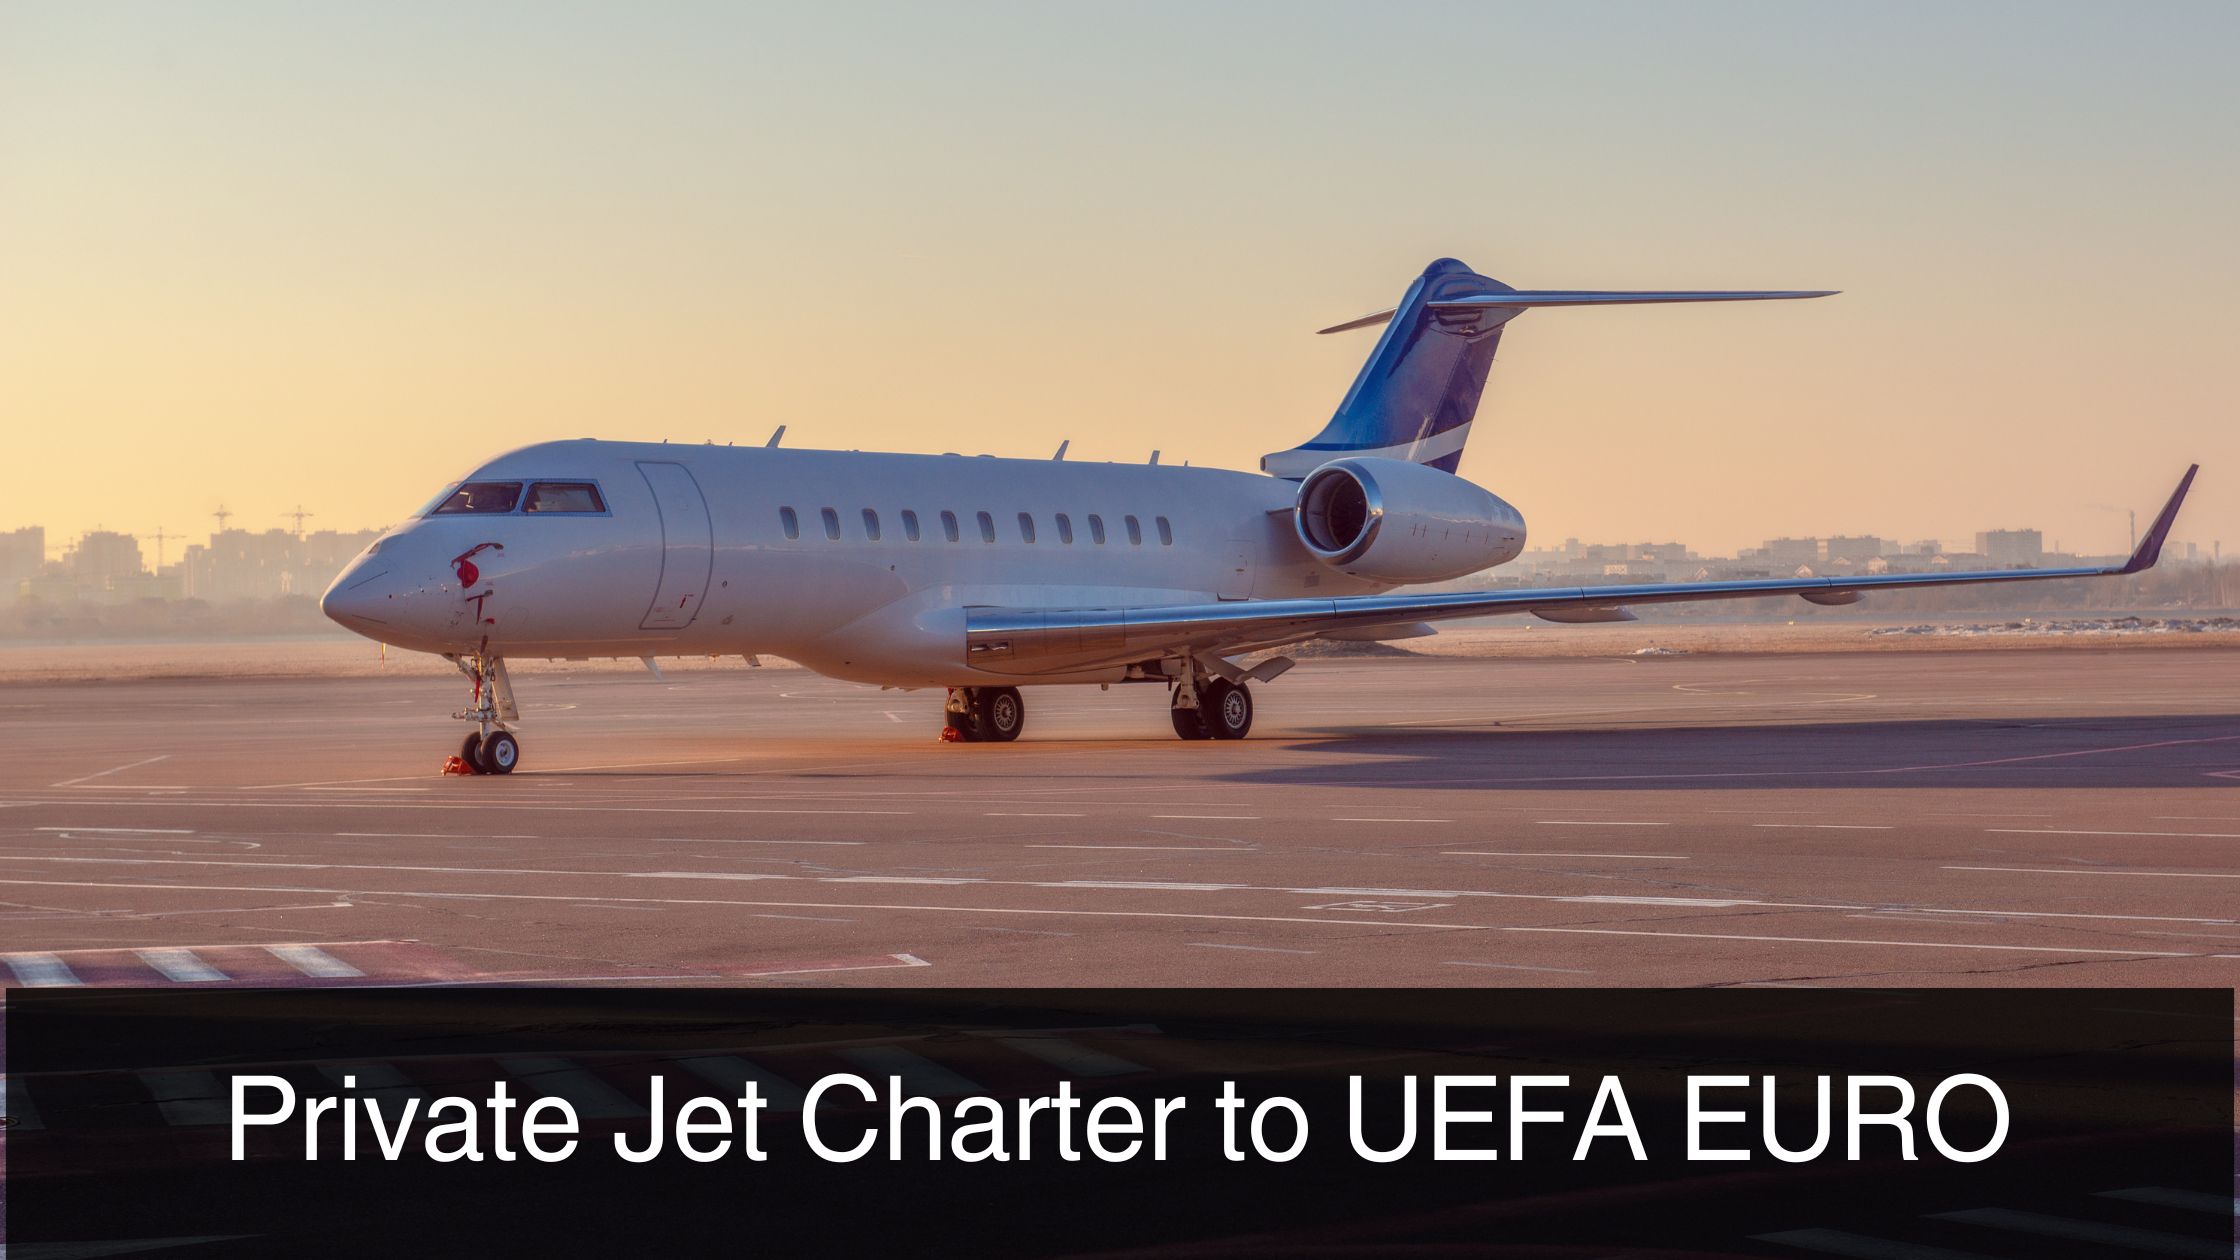 Private Jet Charter to UEFA EURO